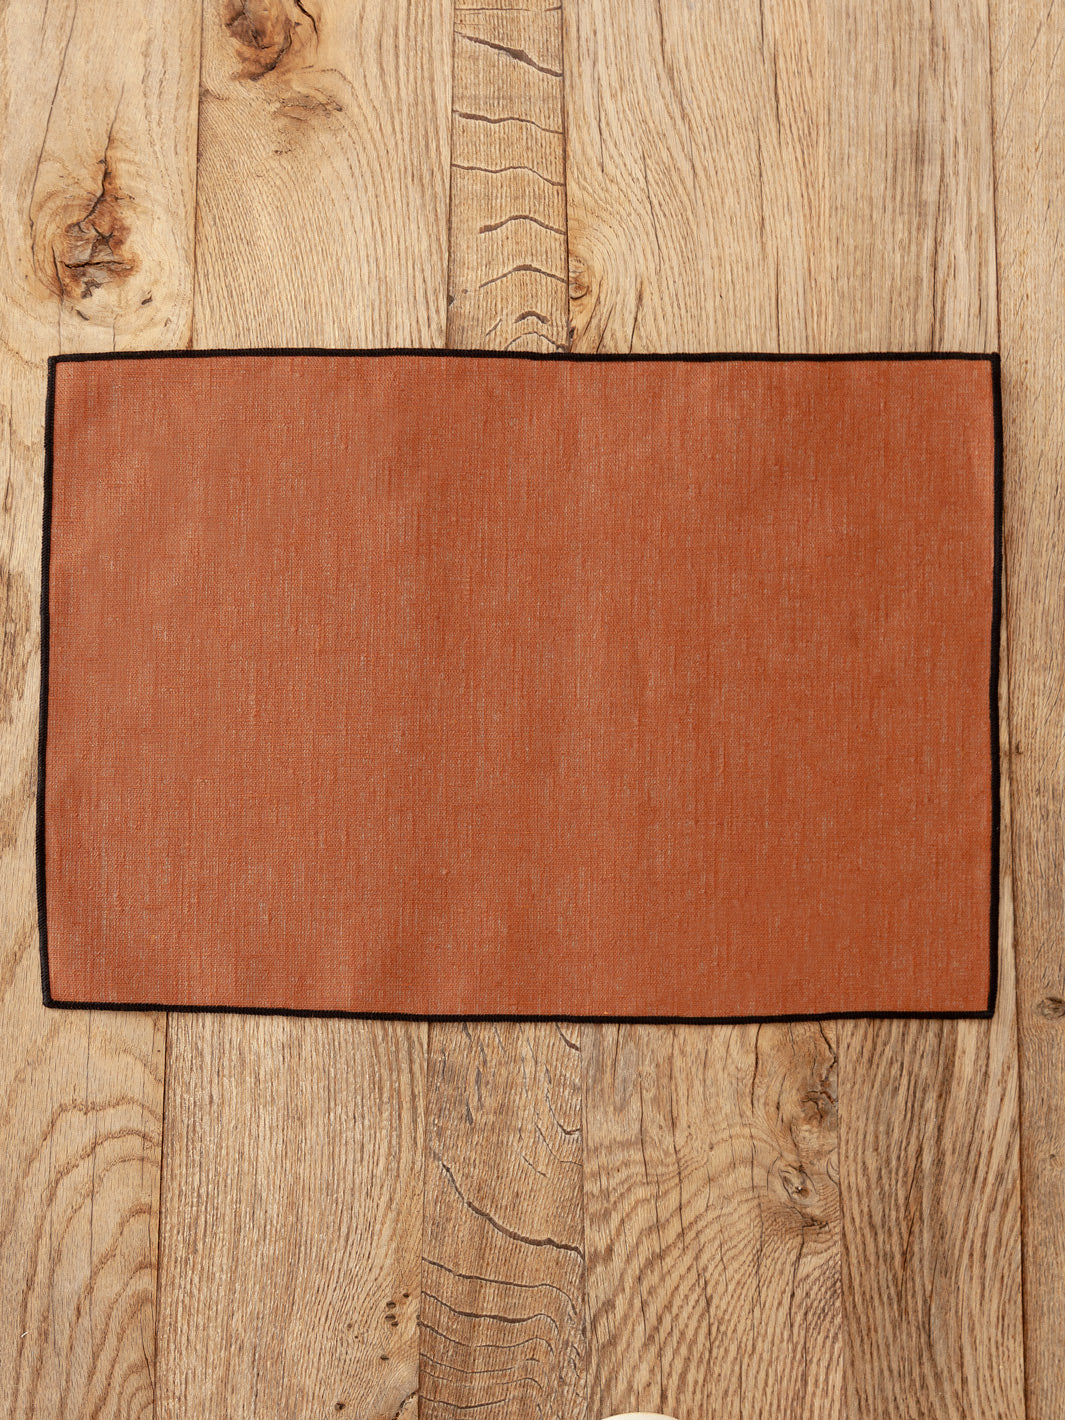 Caramel covered linen placemat